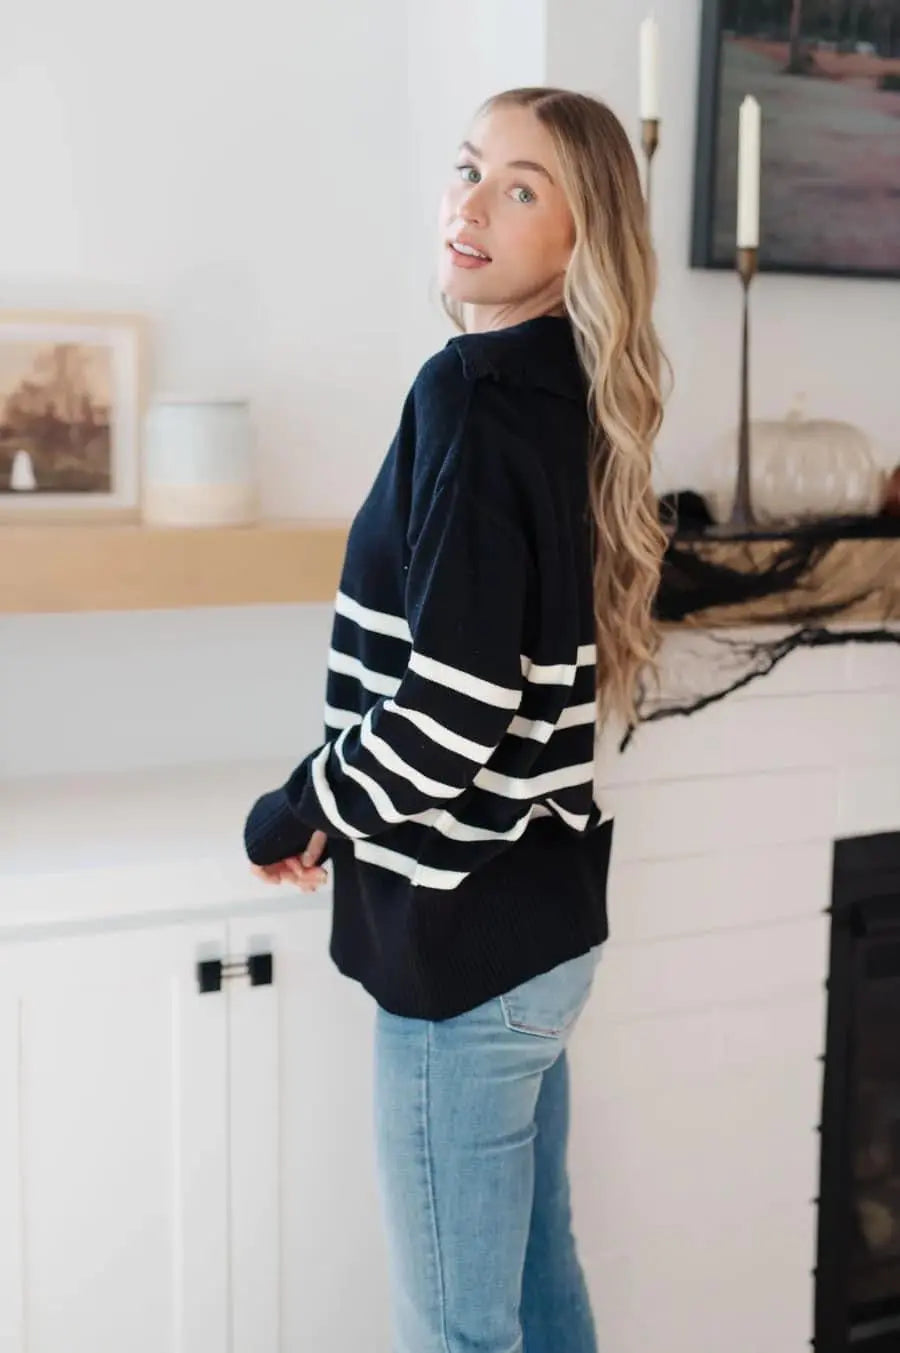 From Here On Out Striped Sweater Styled by Steph